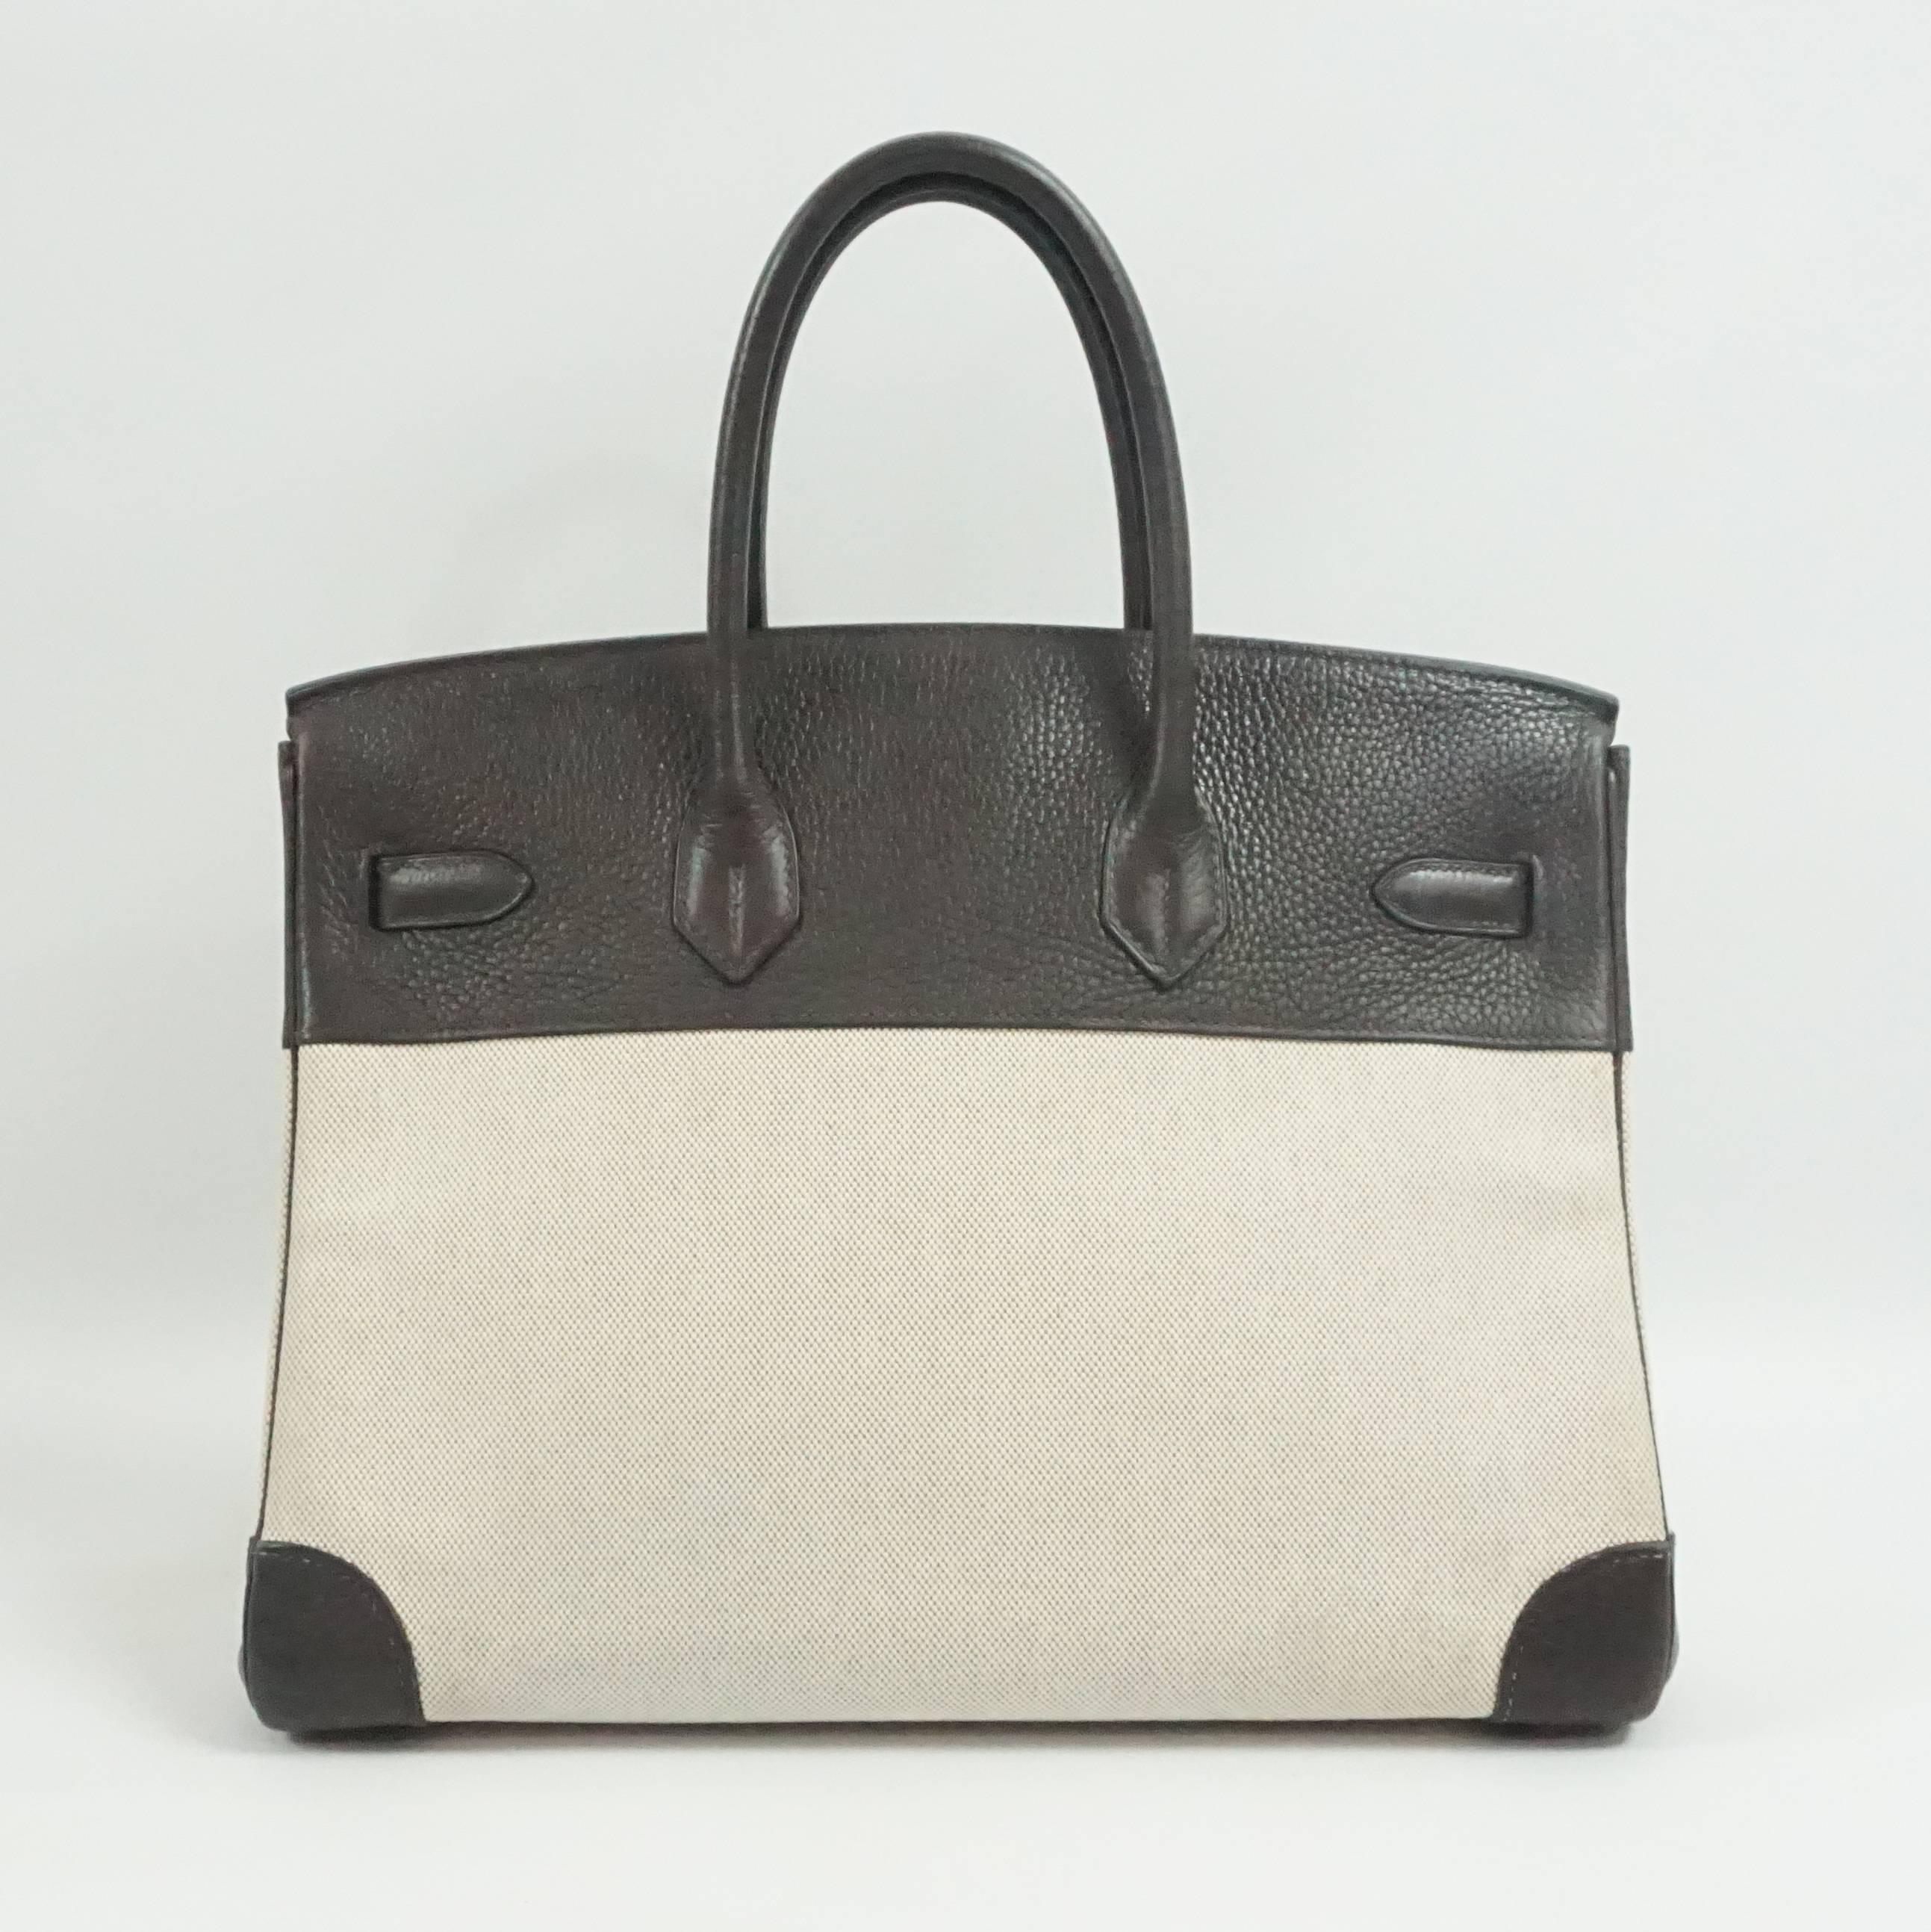 Beige Hermes Canvas and Chocolate Brown Leather 35cm Birkin - SHW - 2006